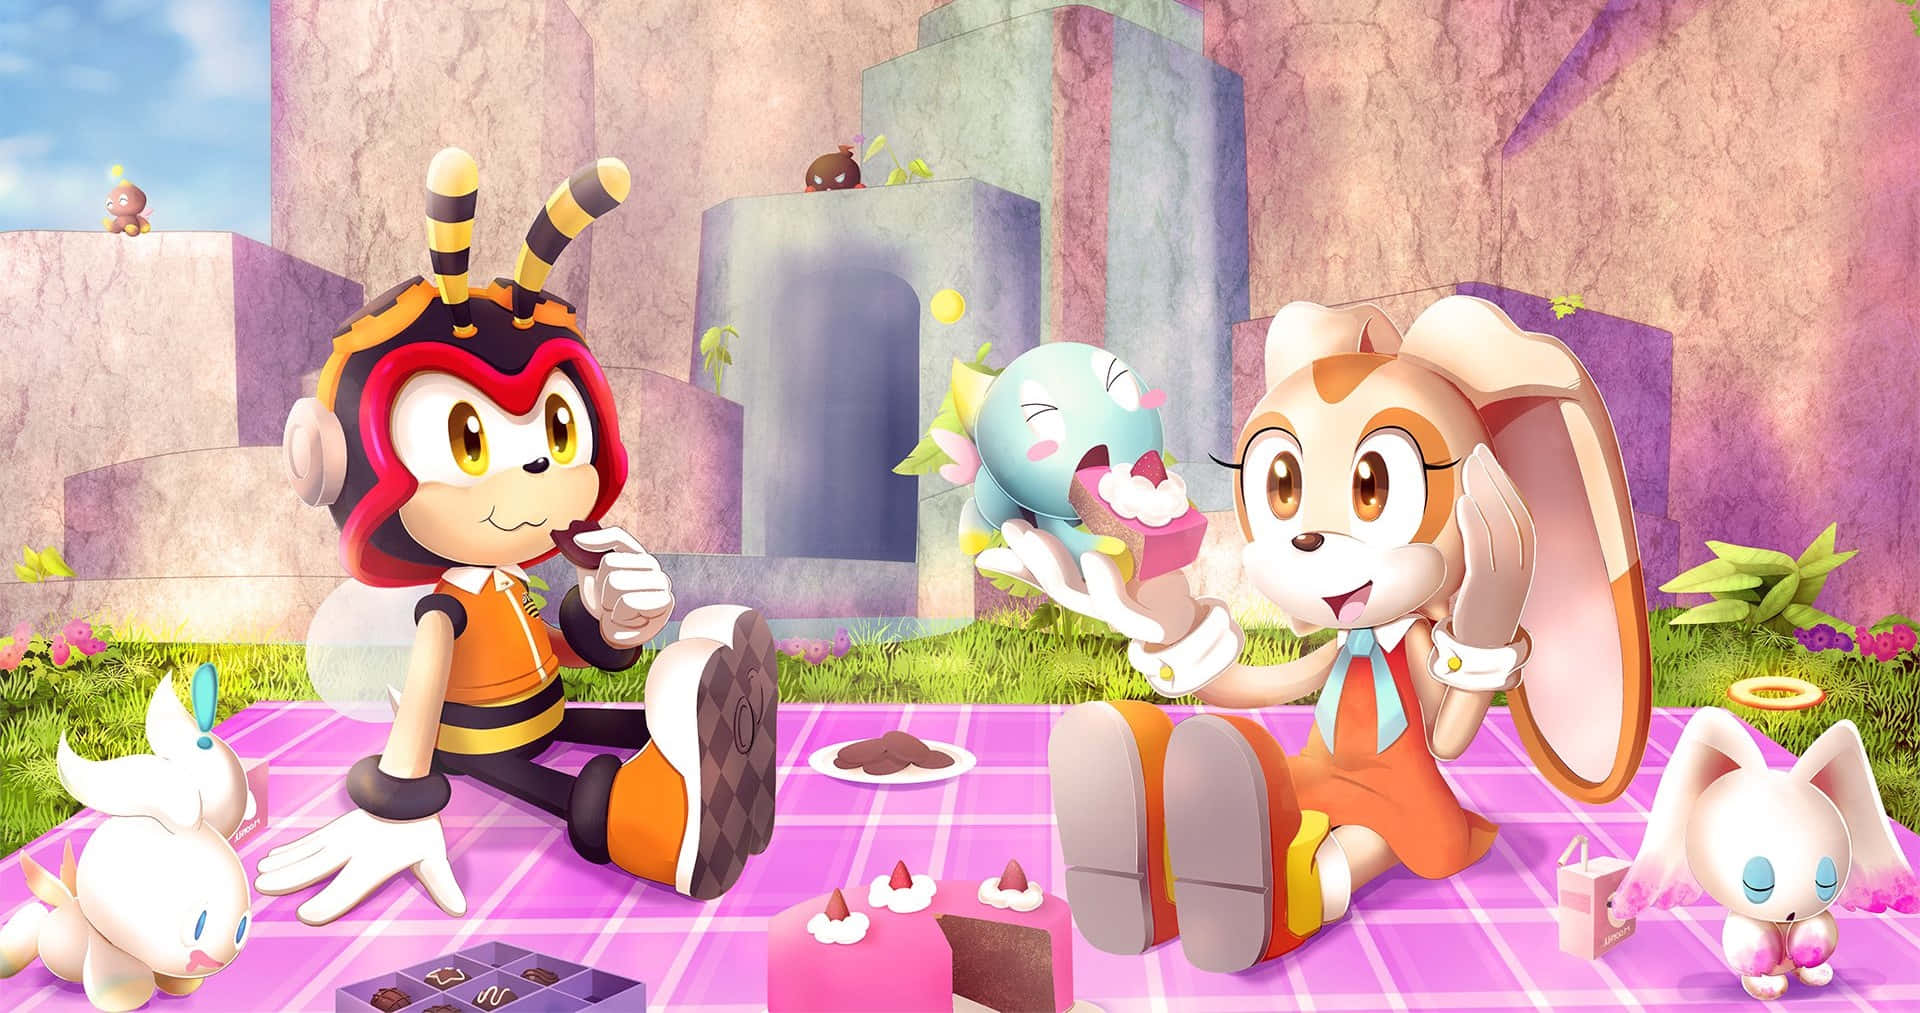 Caption: Charmy Bee, the Enthusiastic Detective from the Sonic Universe! Wallpaper